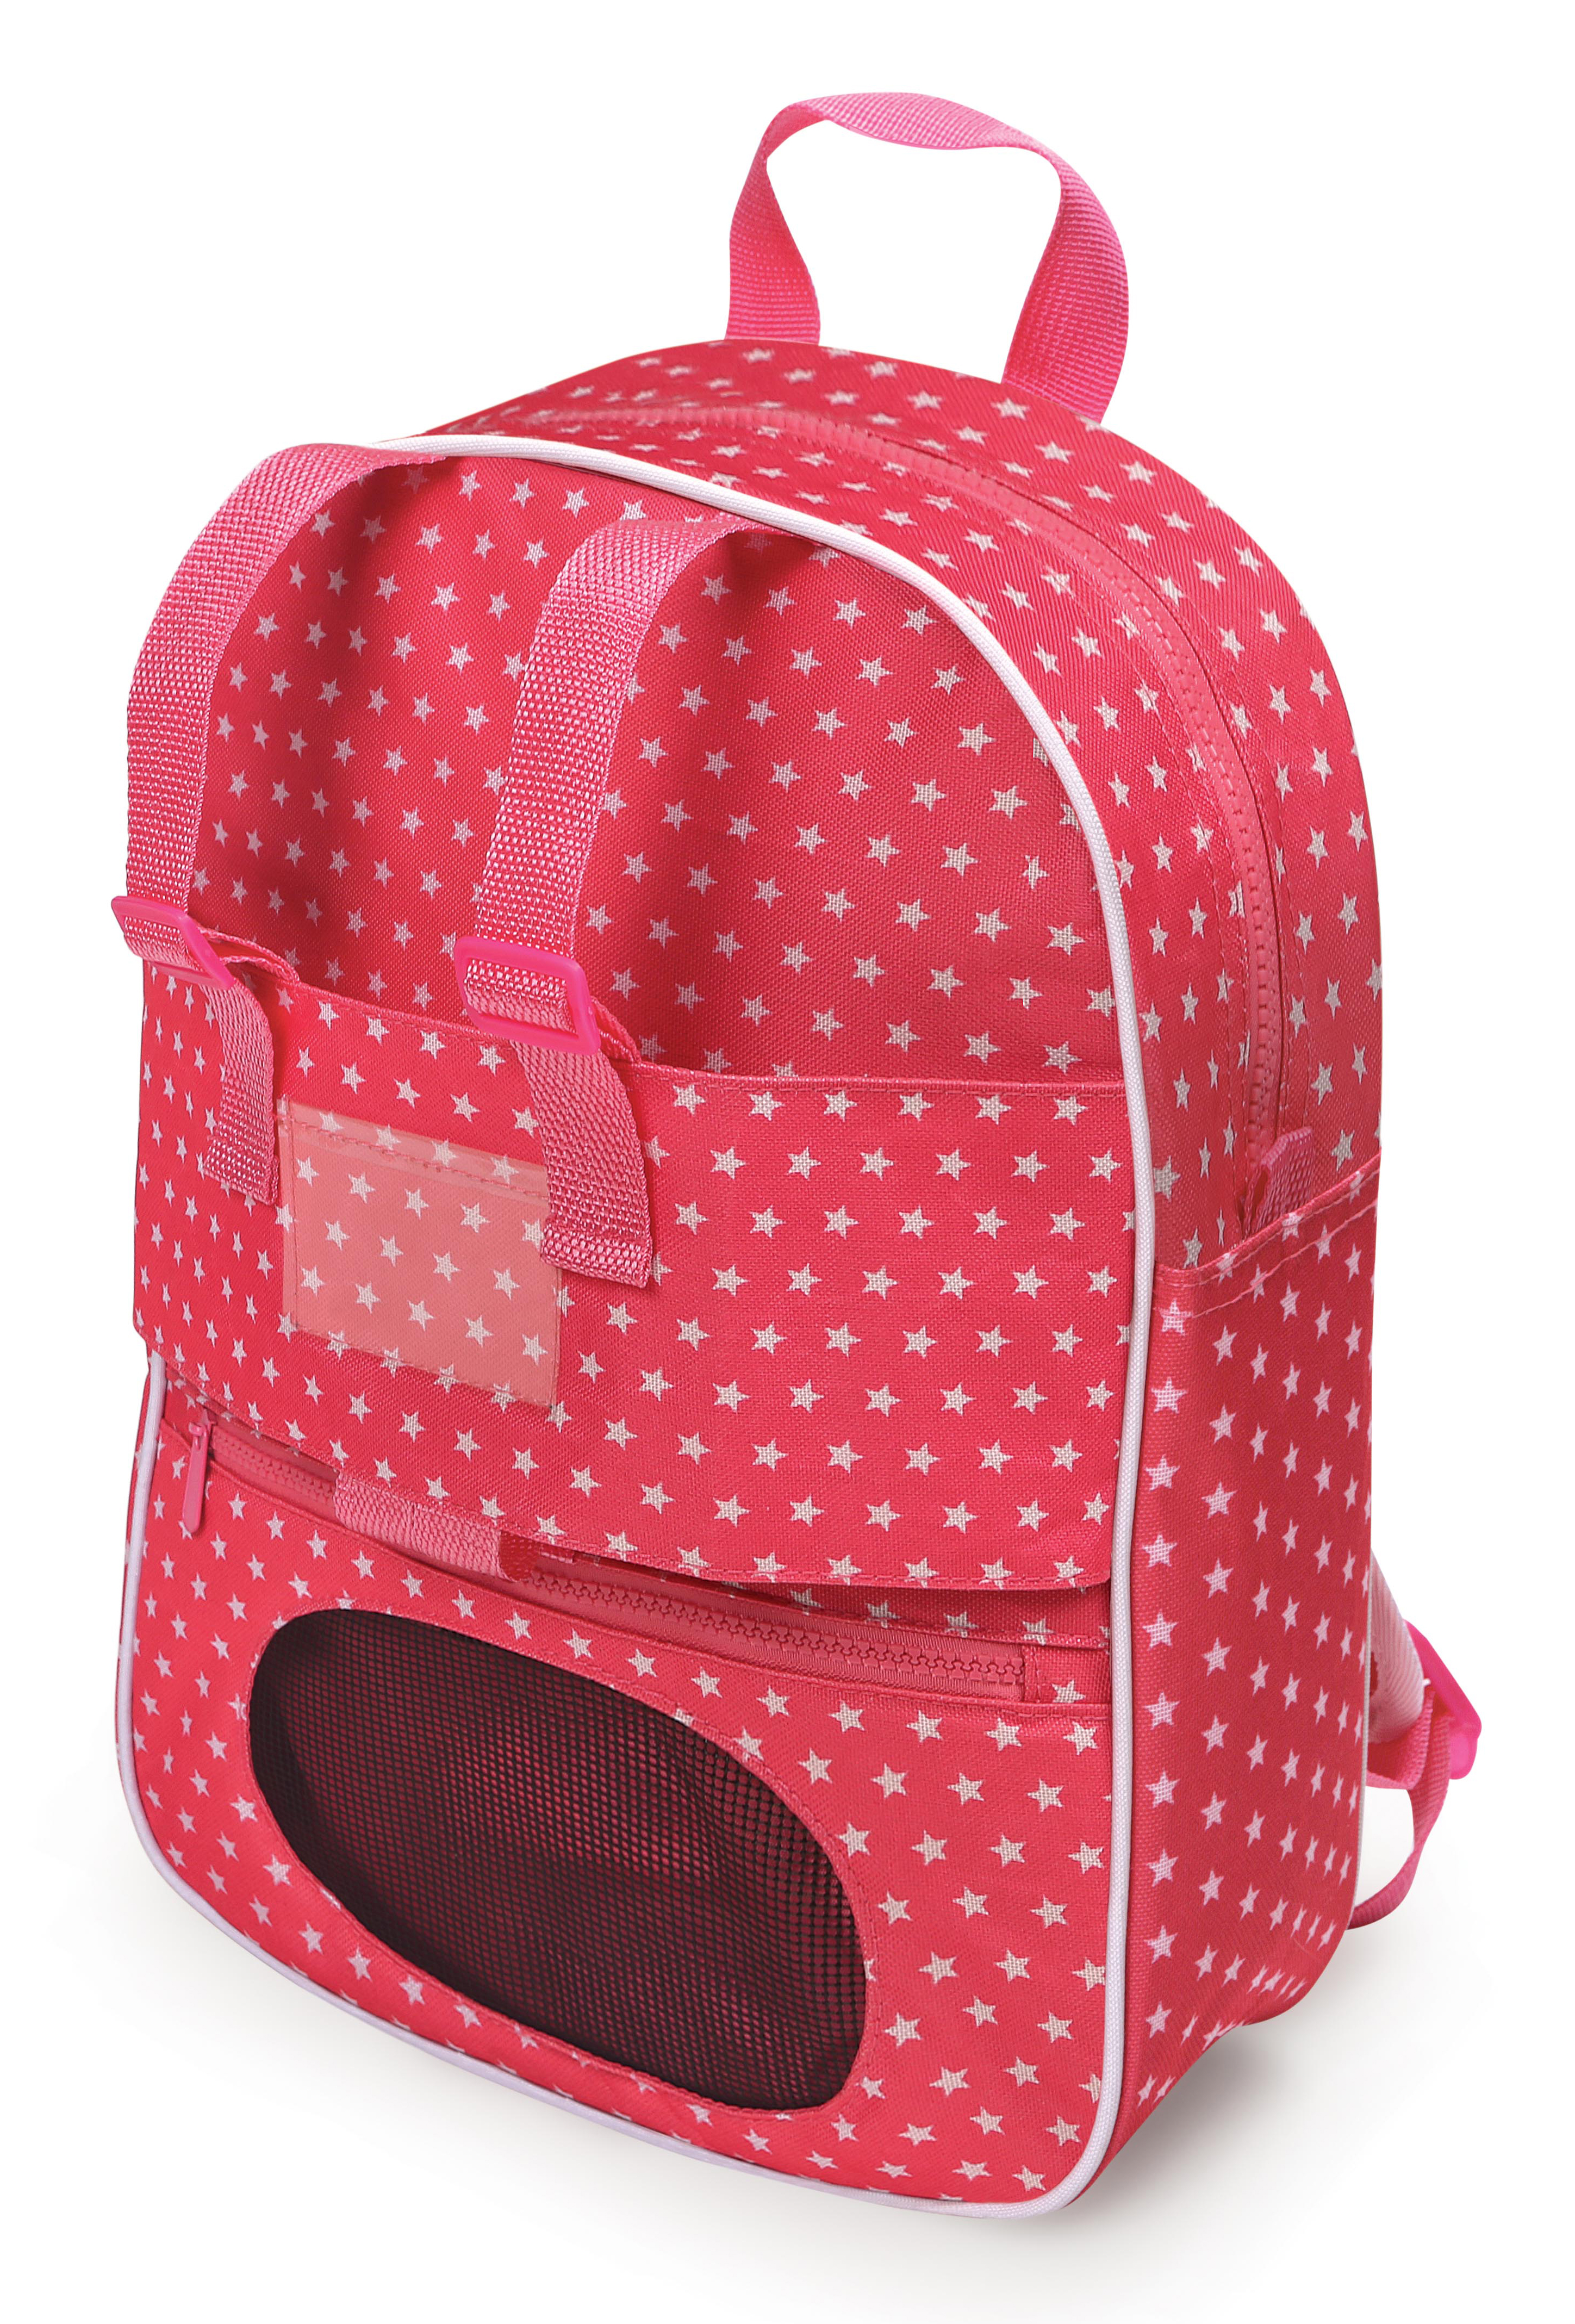 Doll Travel Backpack with Plush Friend Compartment - Pink/Star